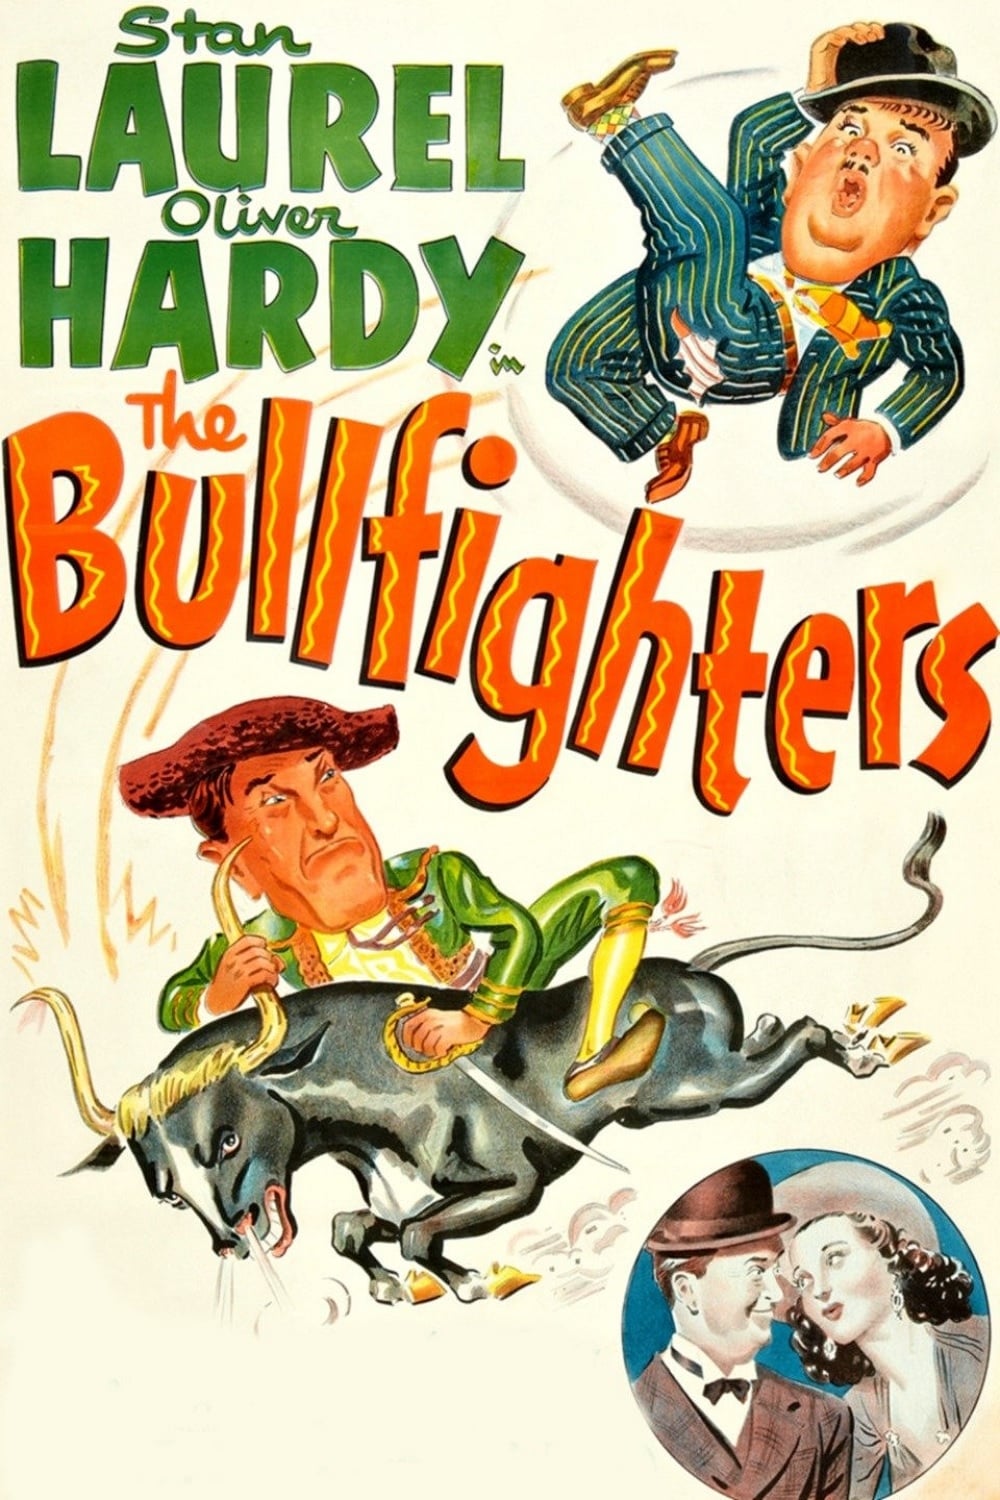 Poster for the movie "The Bullfighters"